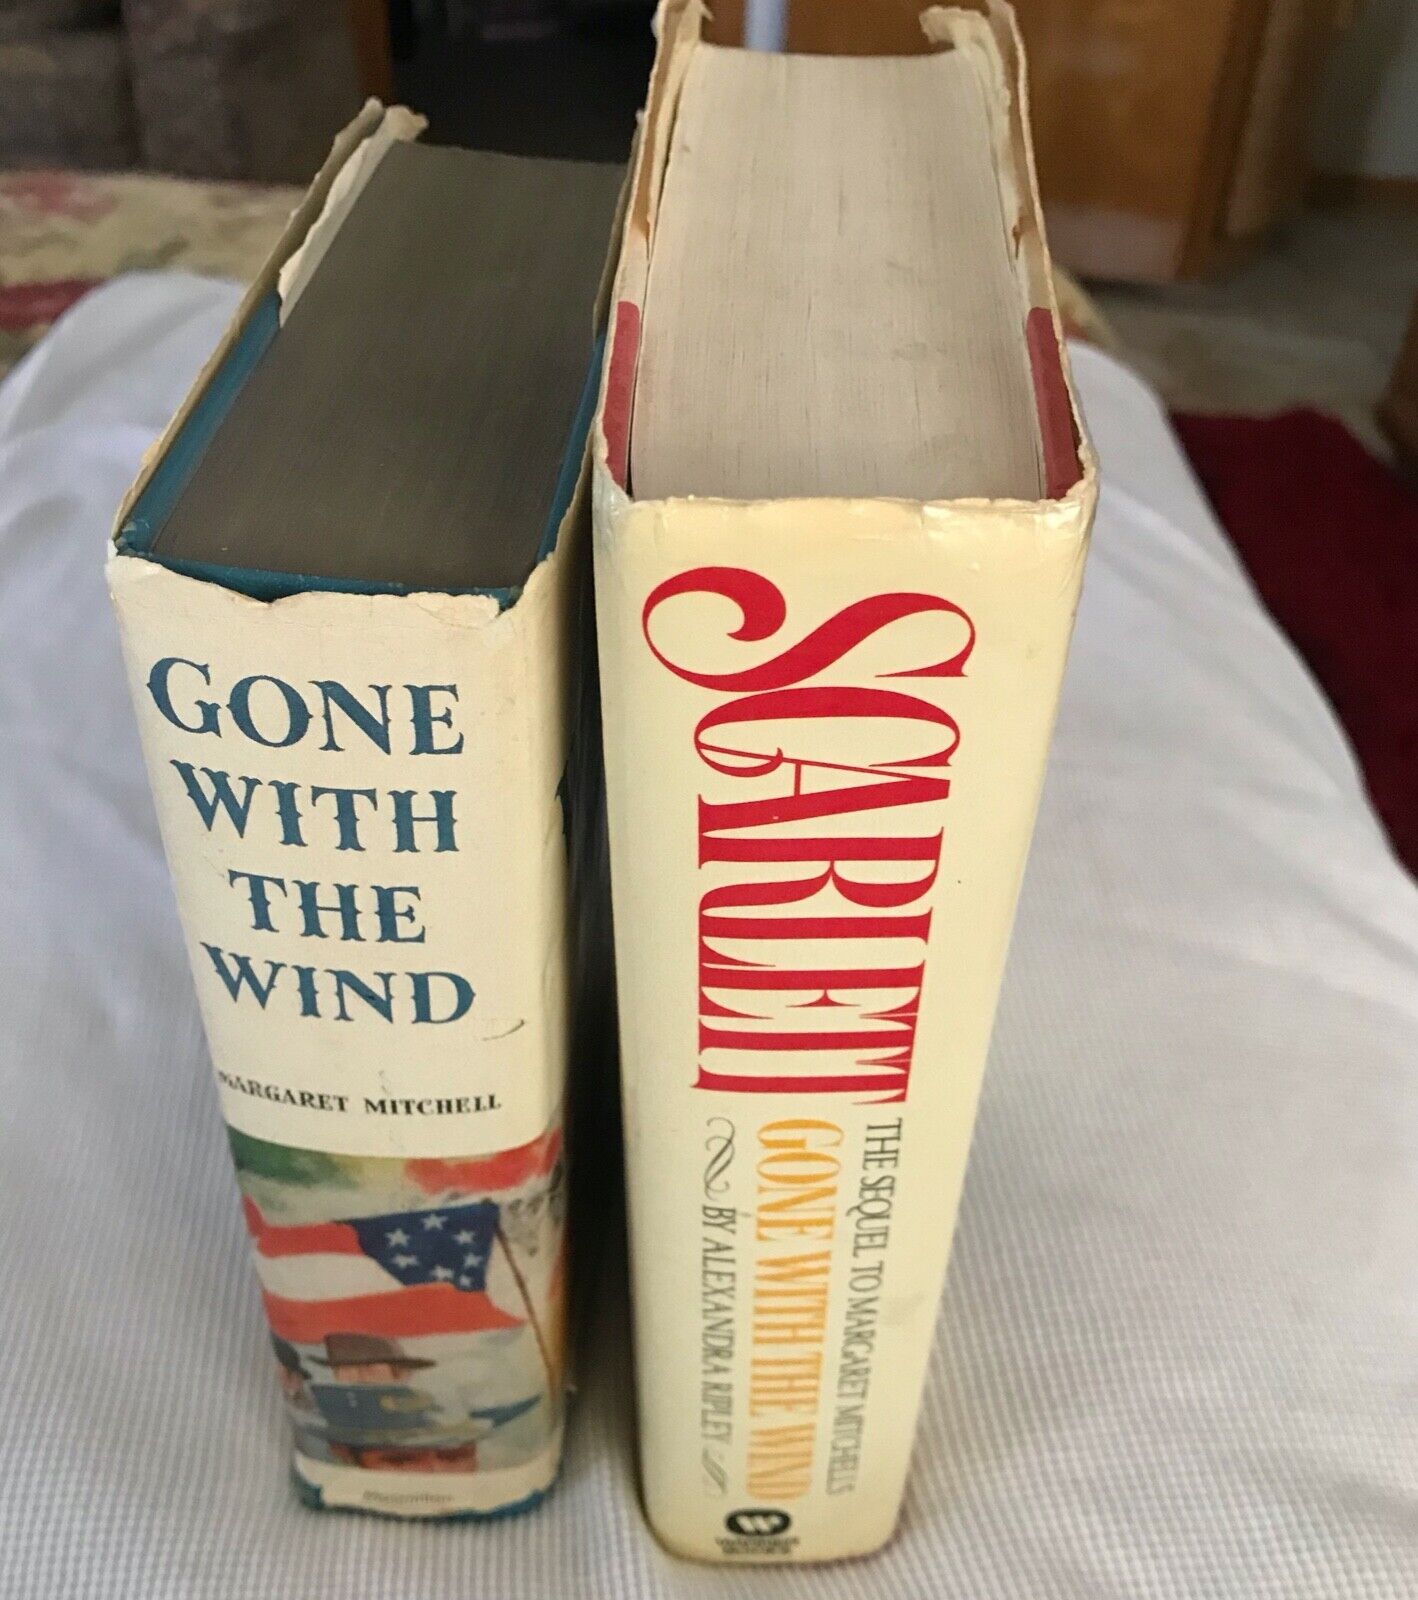 GONE WITH THE WIND 1996 REPRINT AND SCARLETT 1991 A SEQUEL TO THE GWTW BOOK